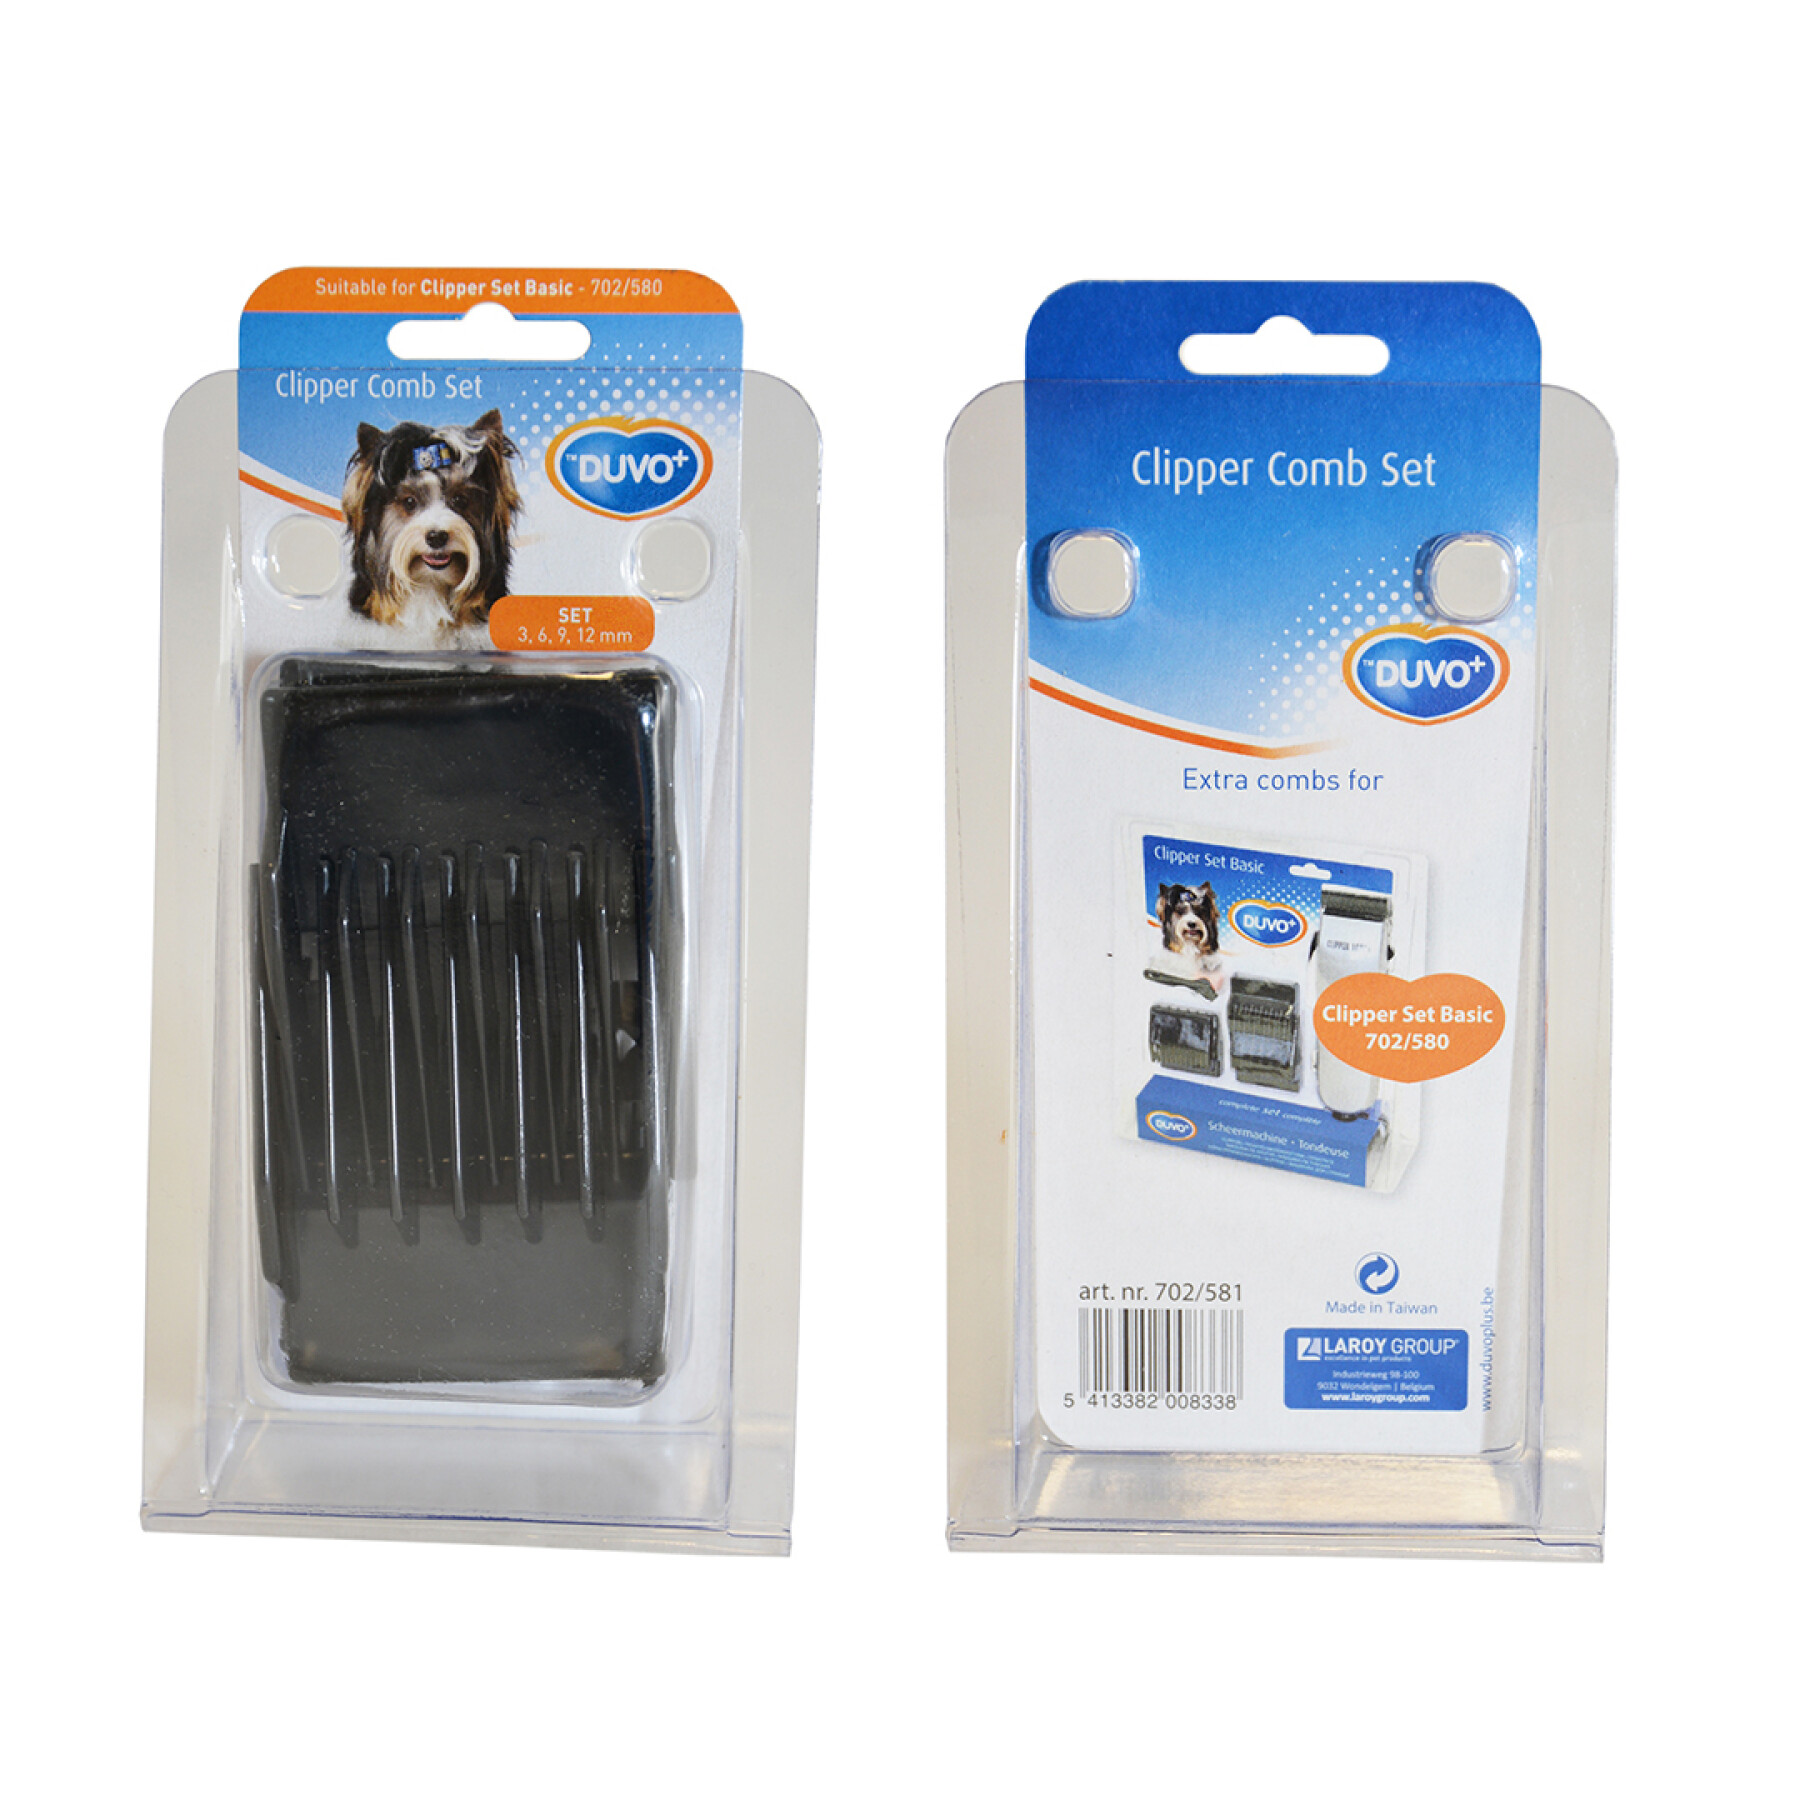 Comb for dog clippers Duvoplus Basic